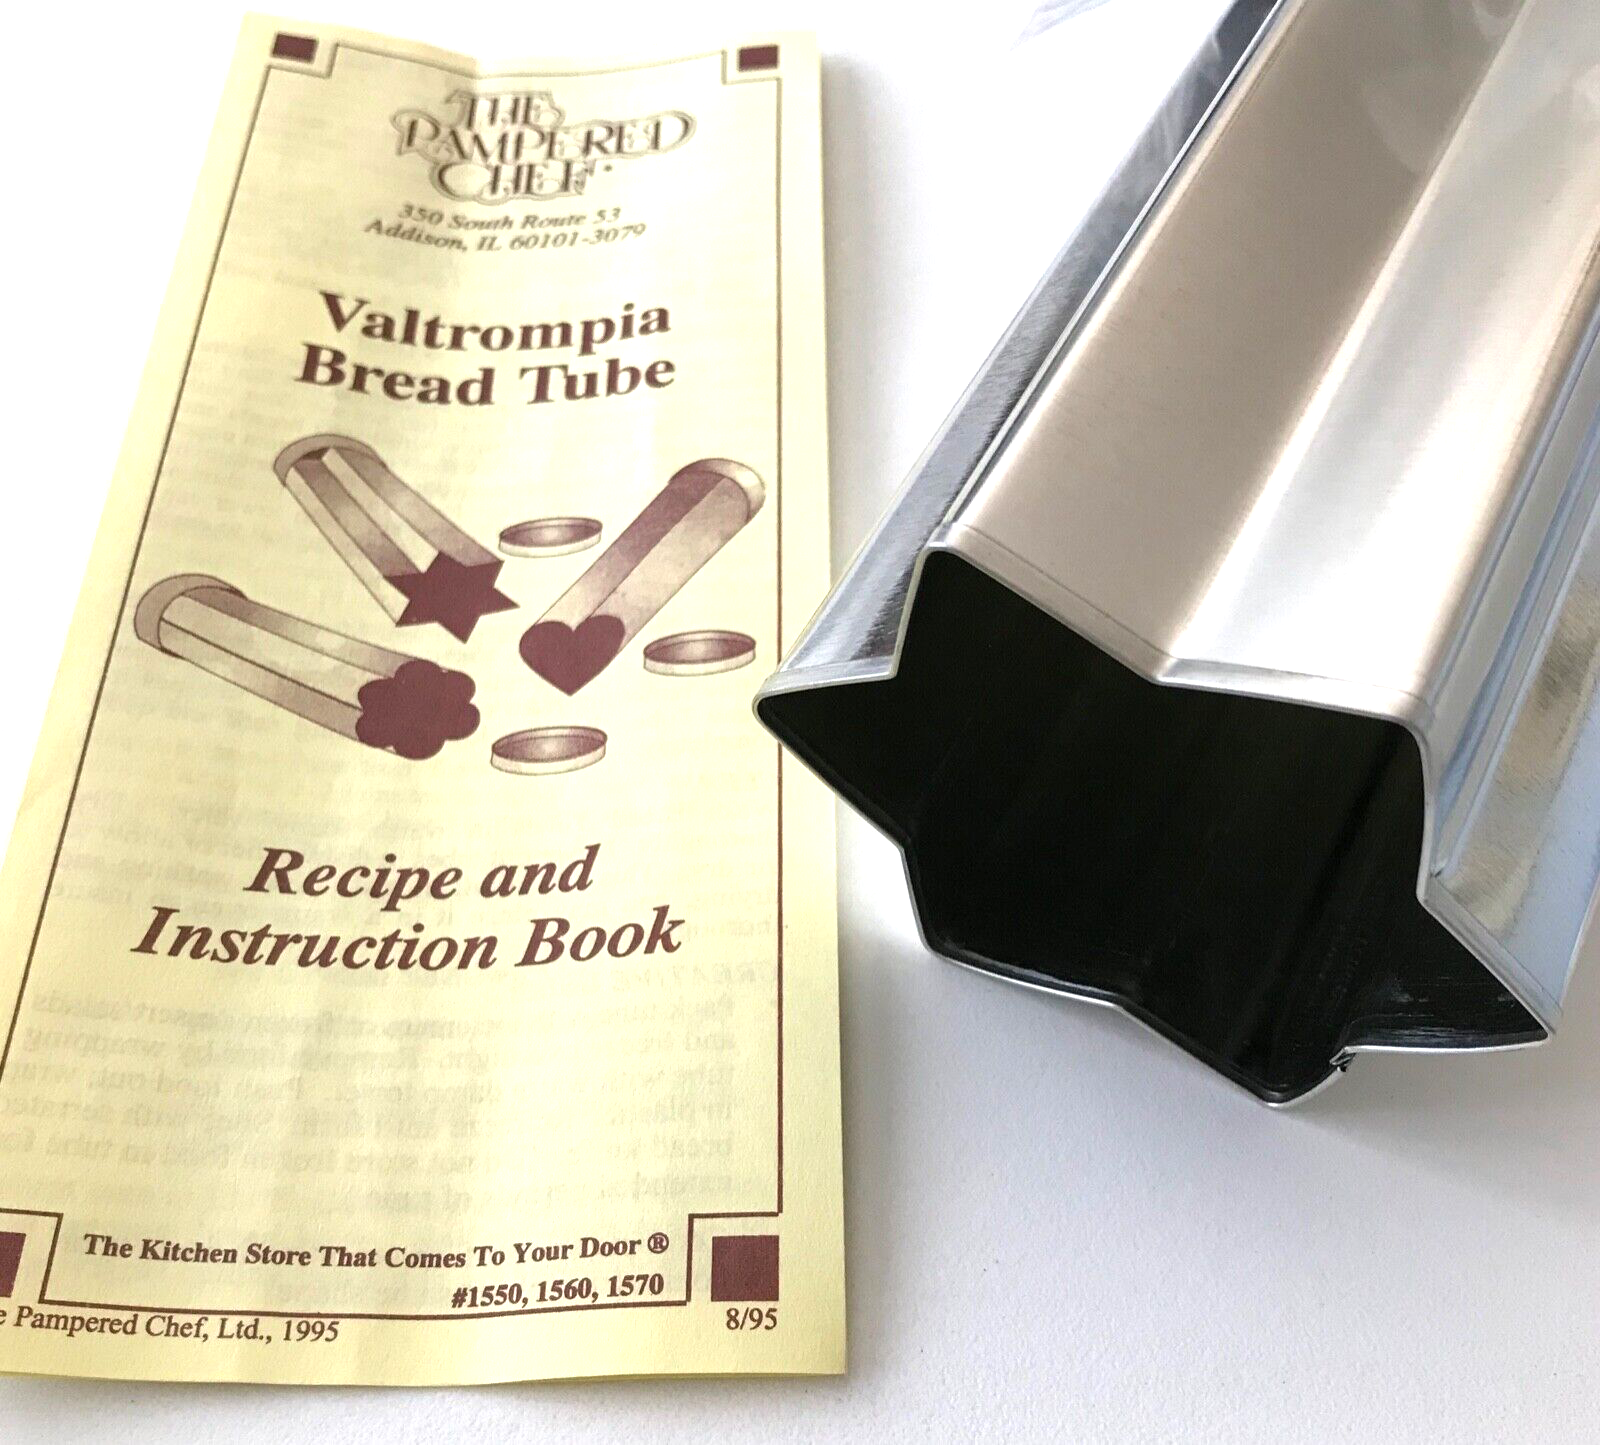 Pampered Chef Bread Tube Star Shaped Valtrompia Recipe Instruction Book New Box - $19.34